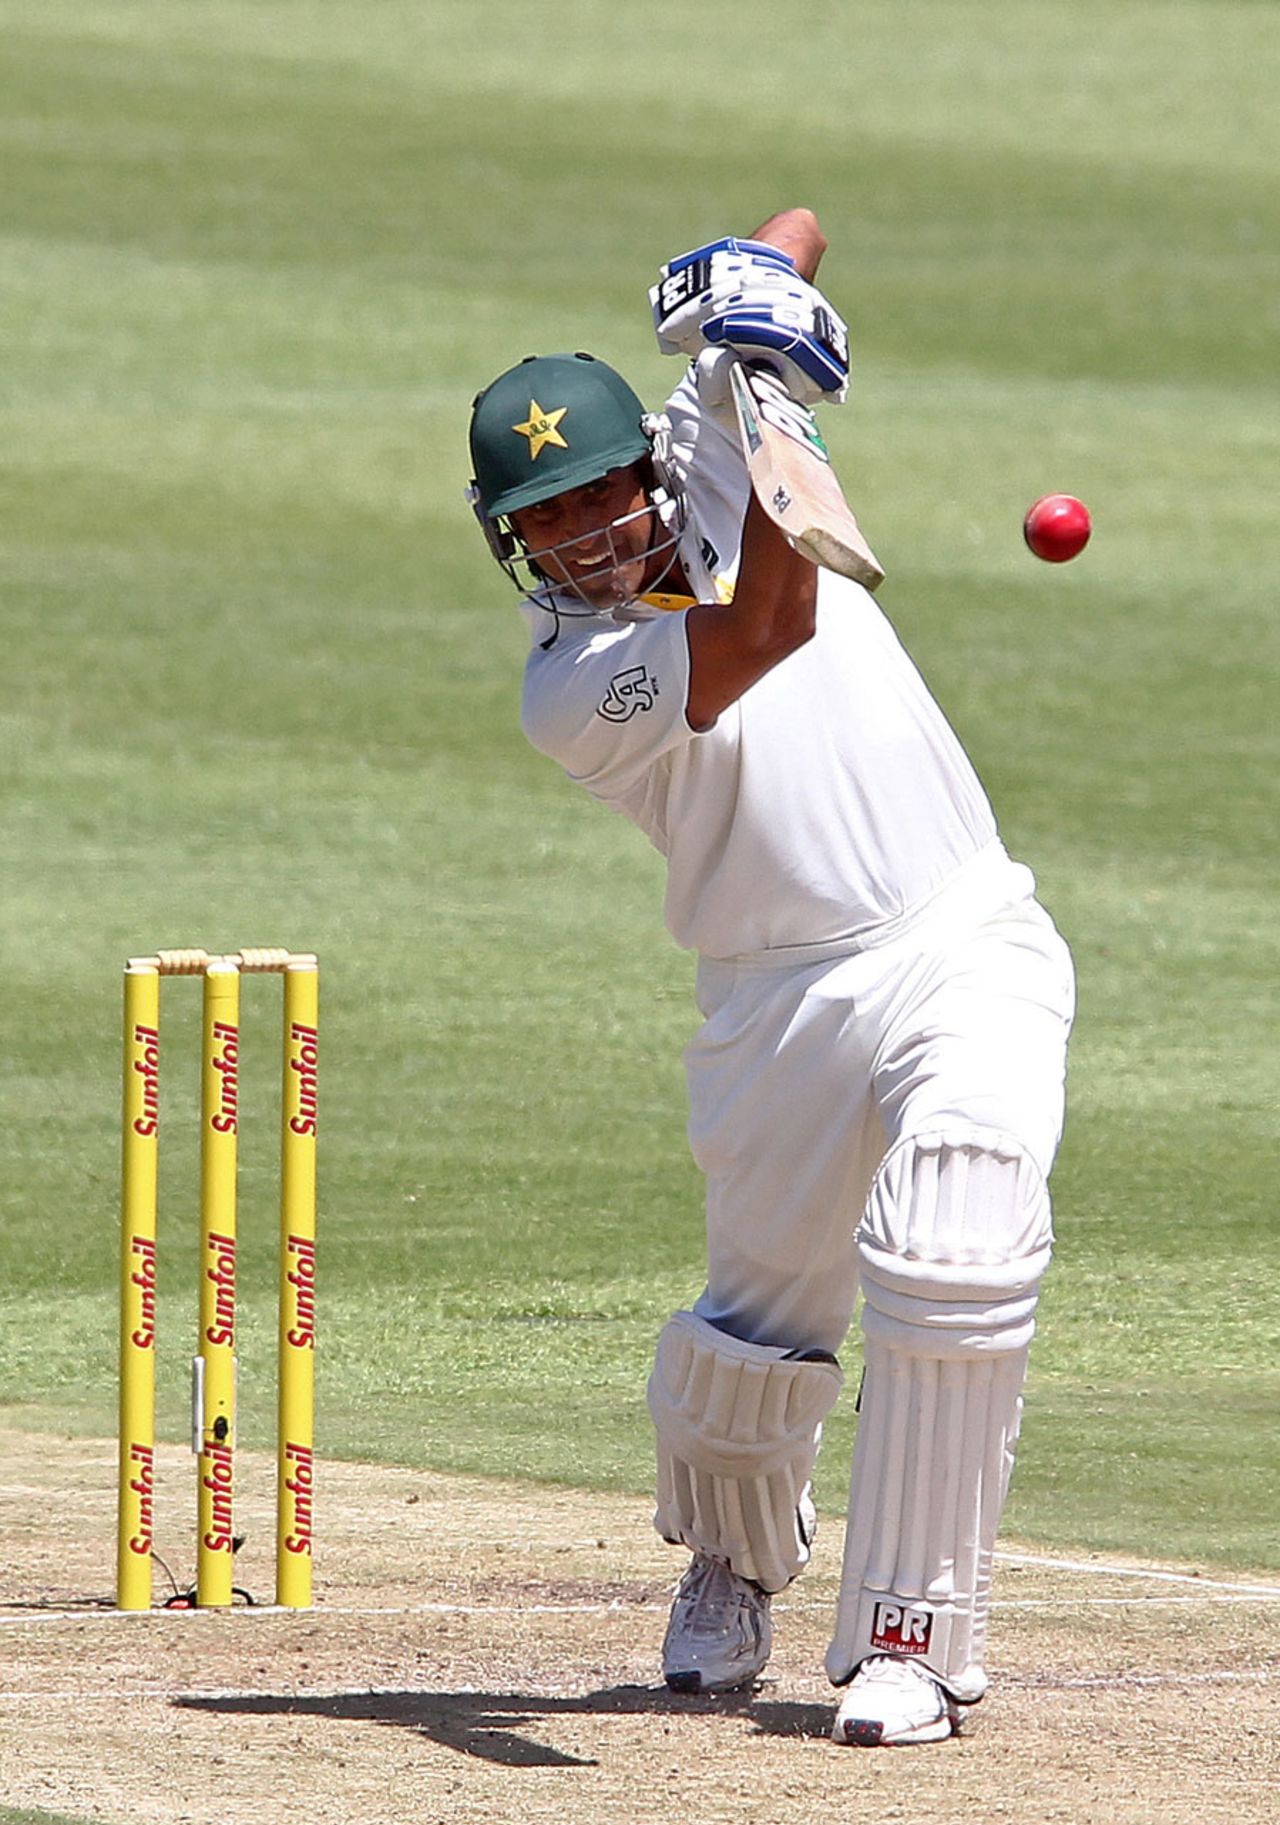 Younis Khan drives on his way to a half-century, South Africa v Pakistan, 2nd Test, Cape Town, 1st day, February 14, 2013